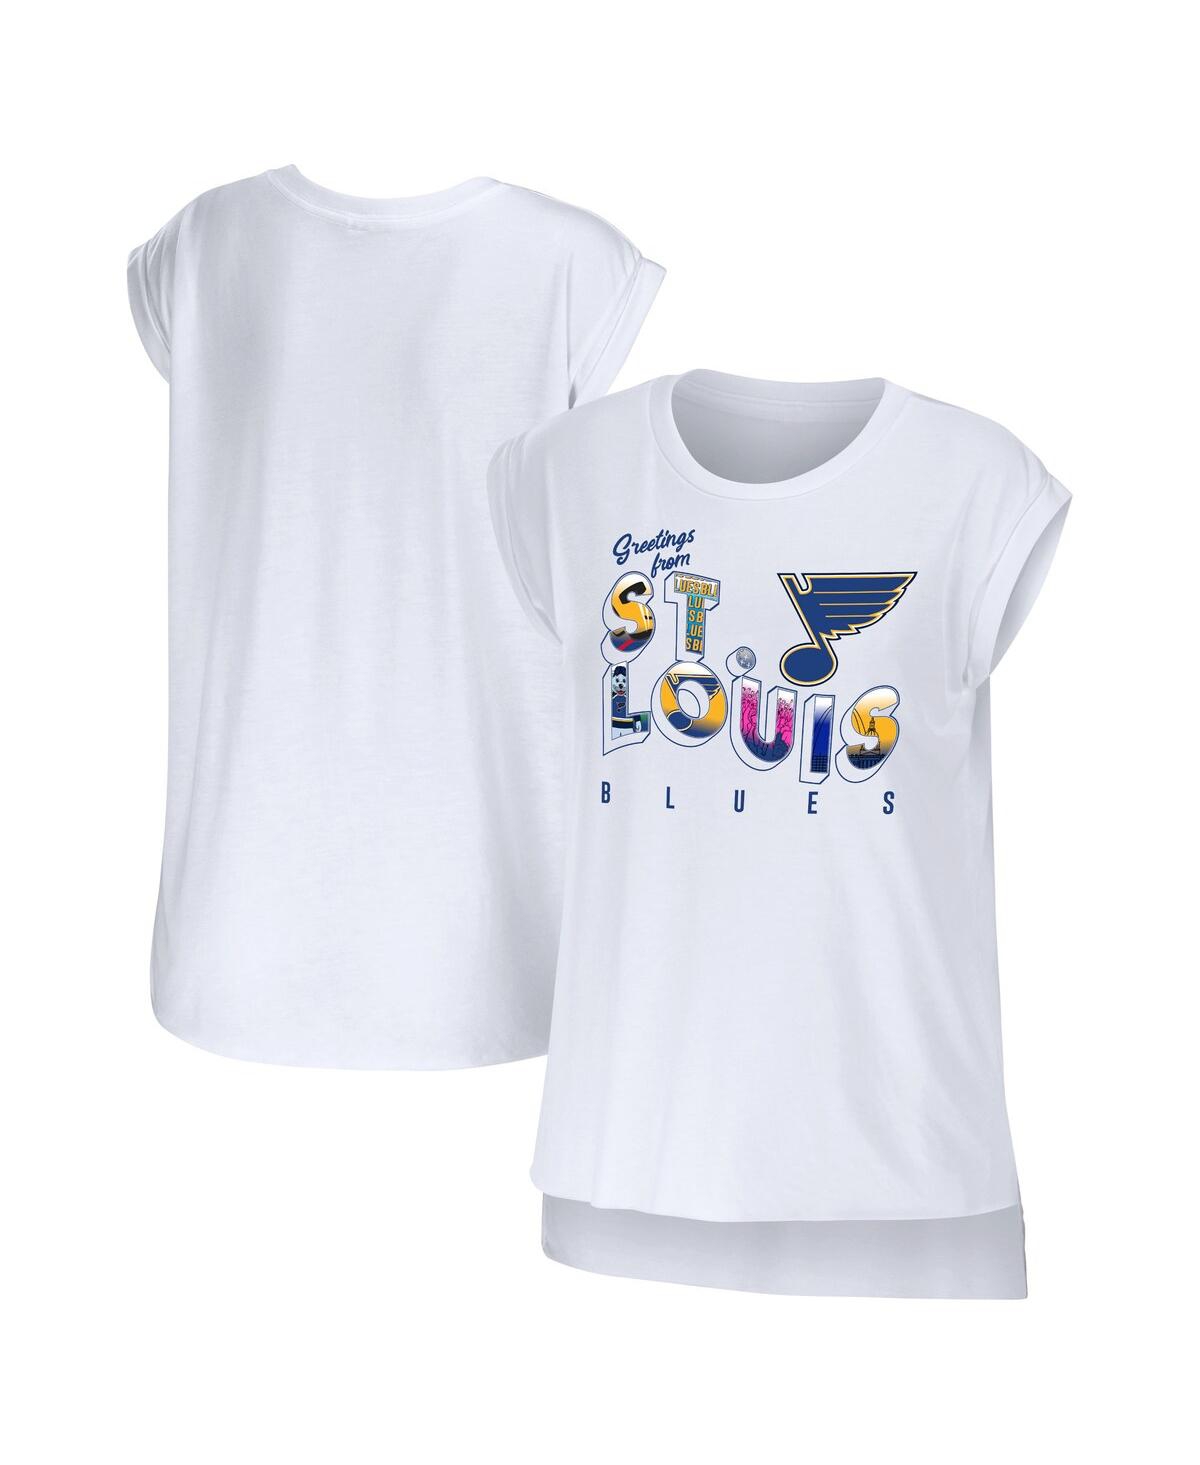 Women's Wear by Erin Andrews White St. Louis Blues Greetings From Muscle T-shirt - White